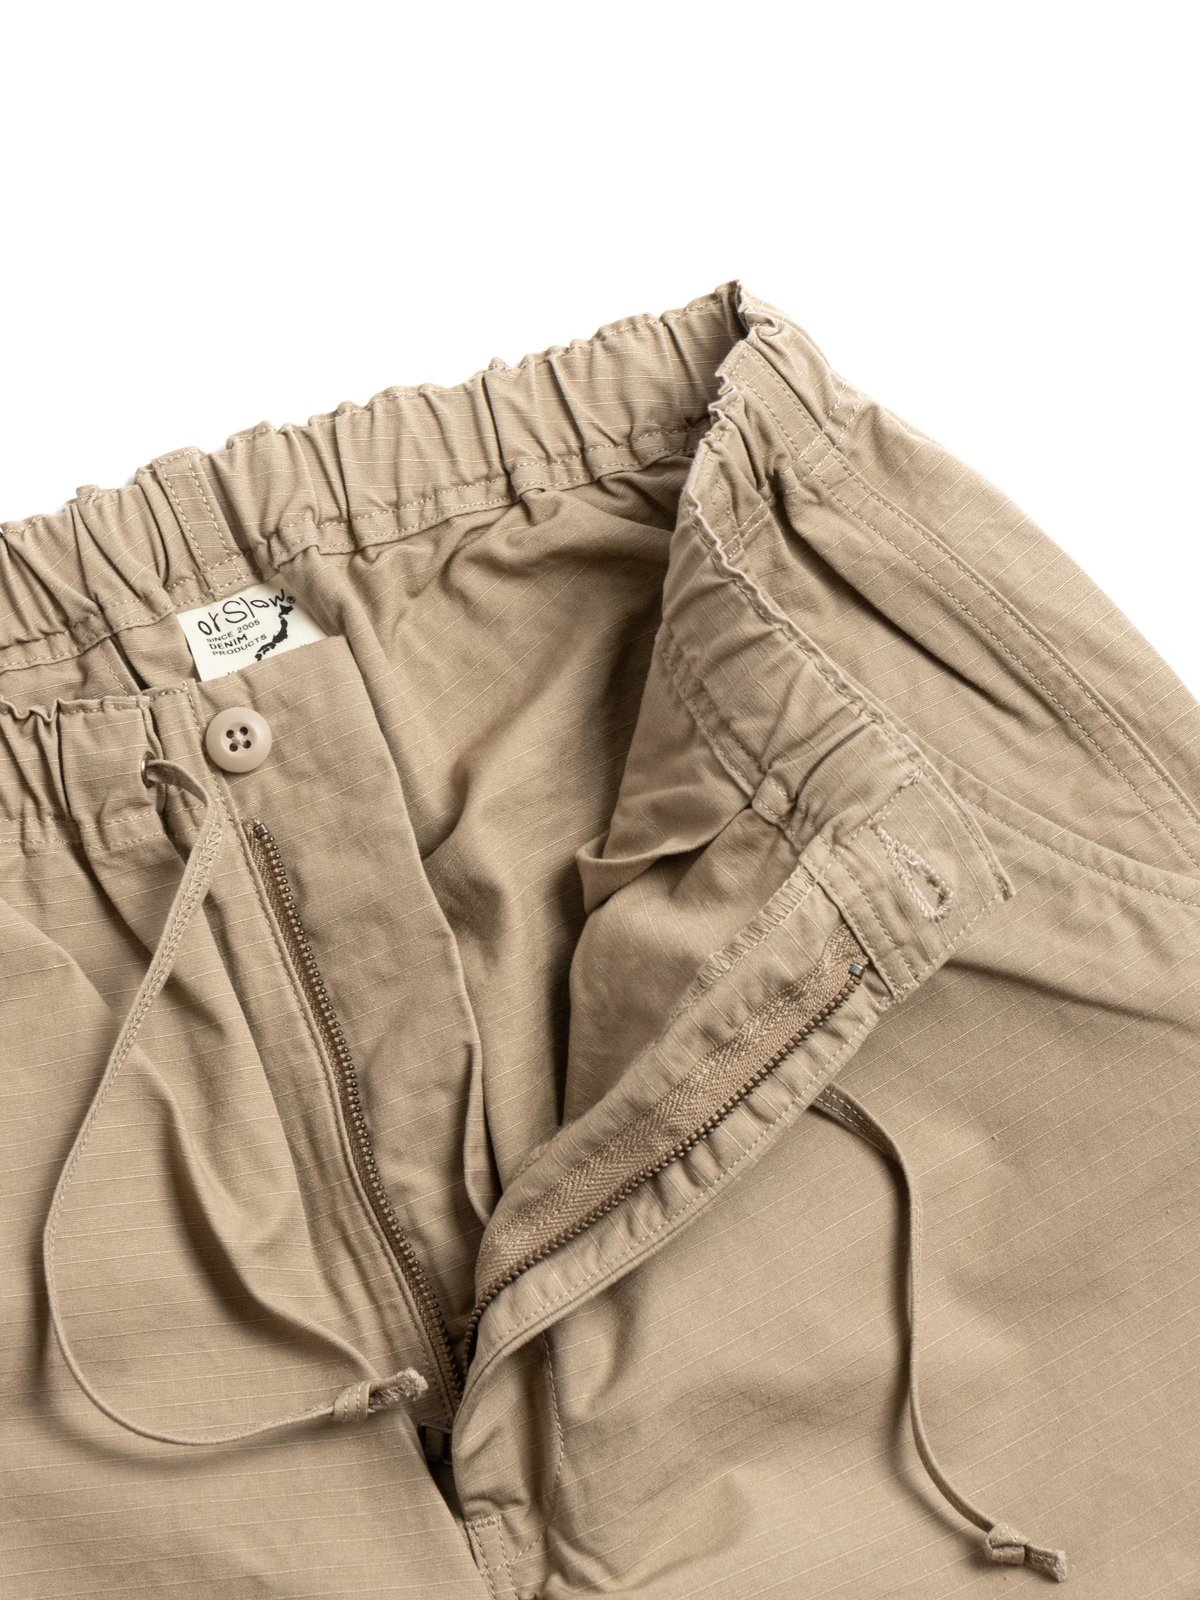 NEW YORKER PANT BEIGE RIPSTOP by orSlow – The Bureau Belfast - The ...